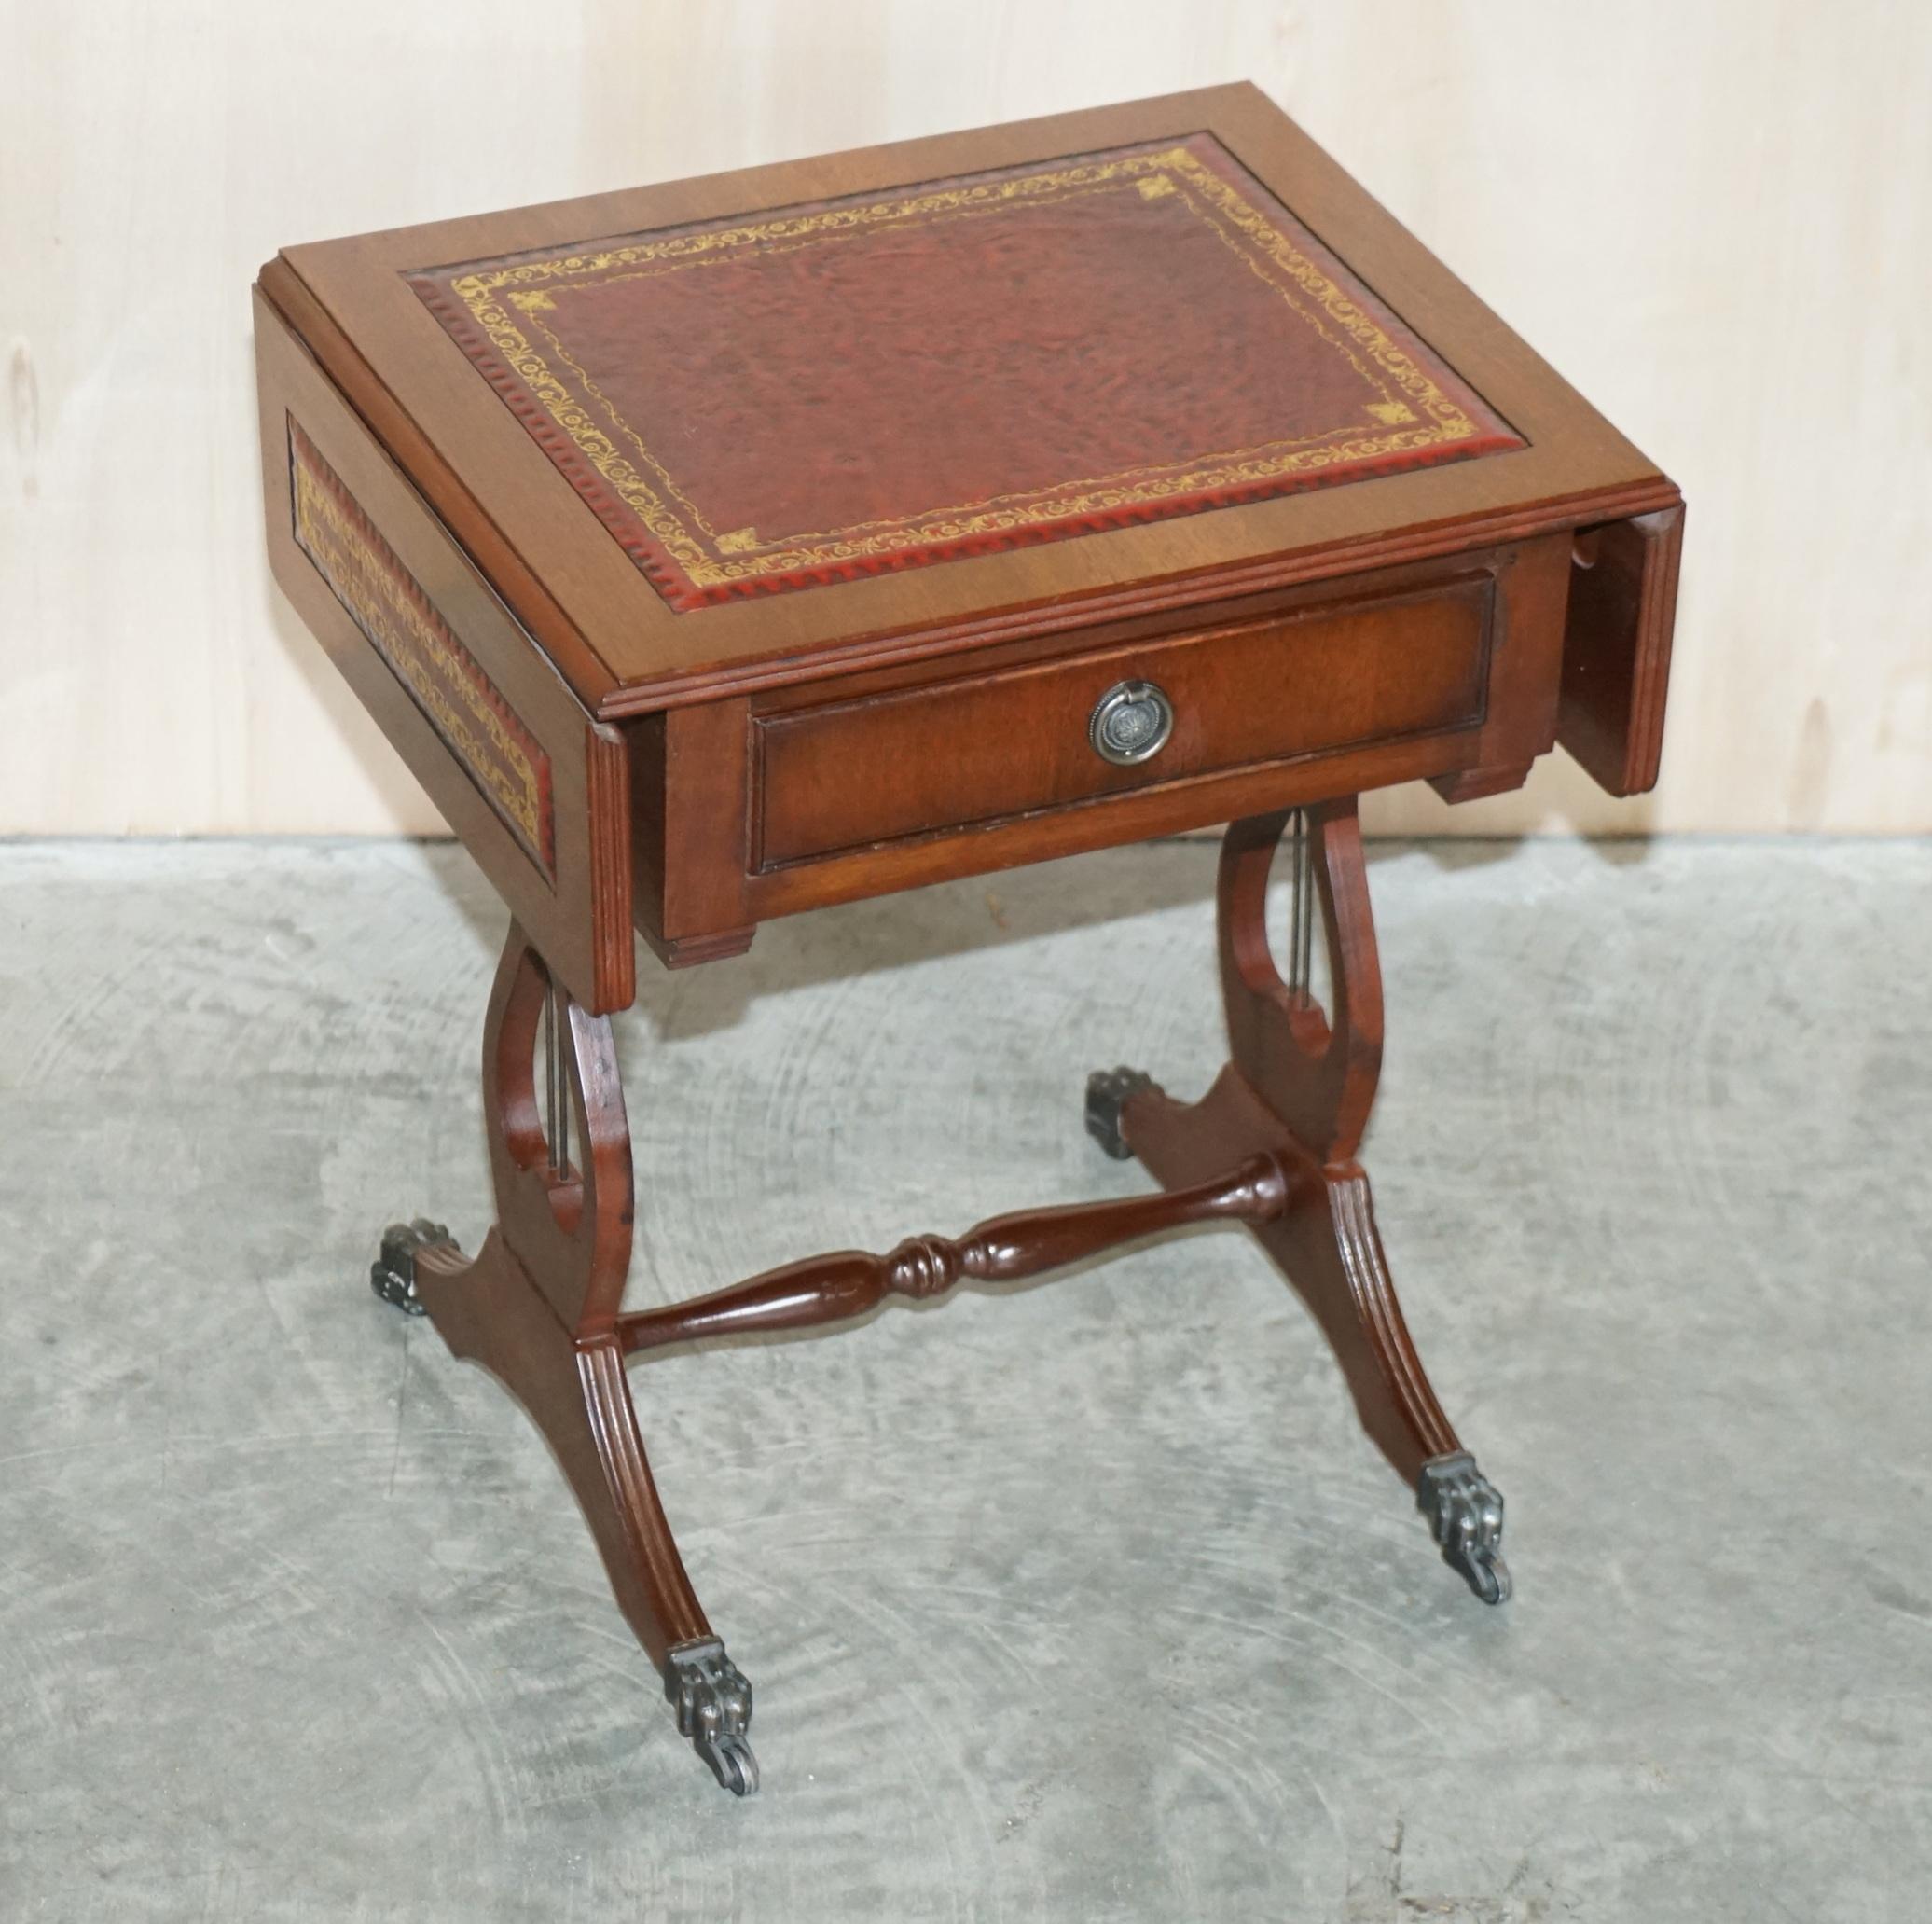 We are delighted to offer this lovely Bevan Funnell vintage Mahogany side table with extending oxblood leather top and single drawer.

A very good looking and versatile piece, the table has single drawer to the front and false drawer to the back,